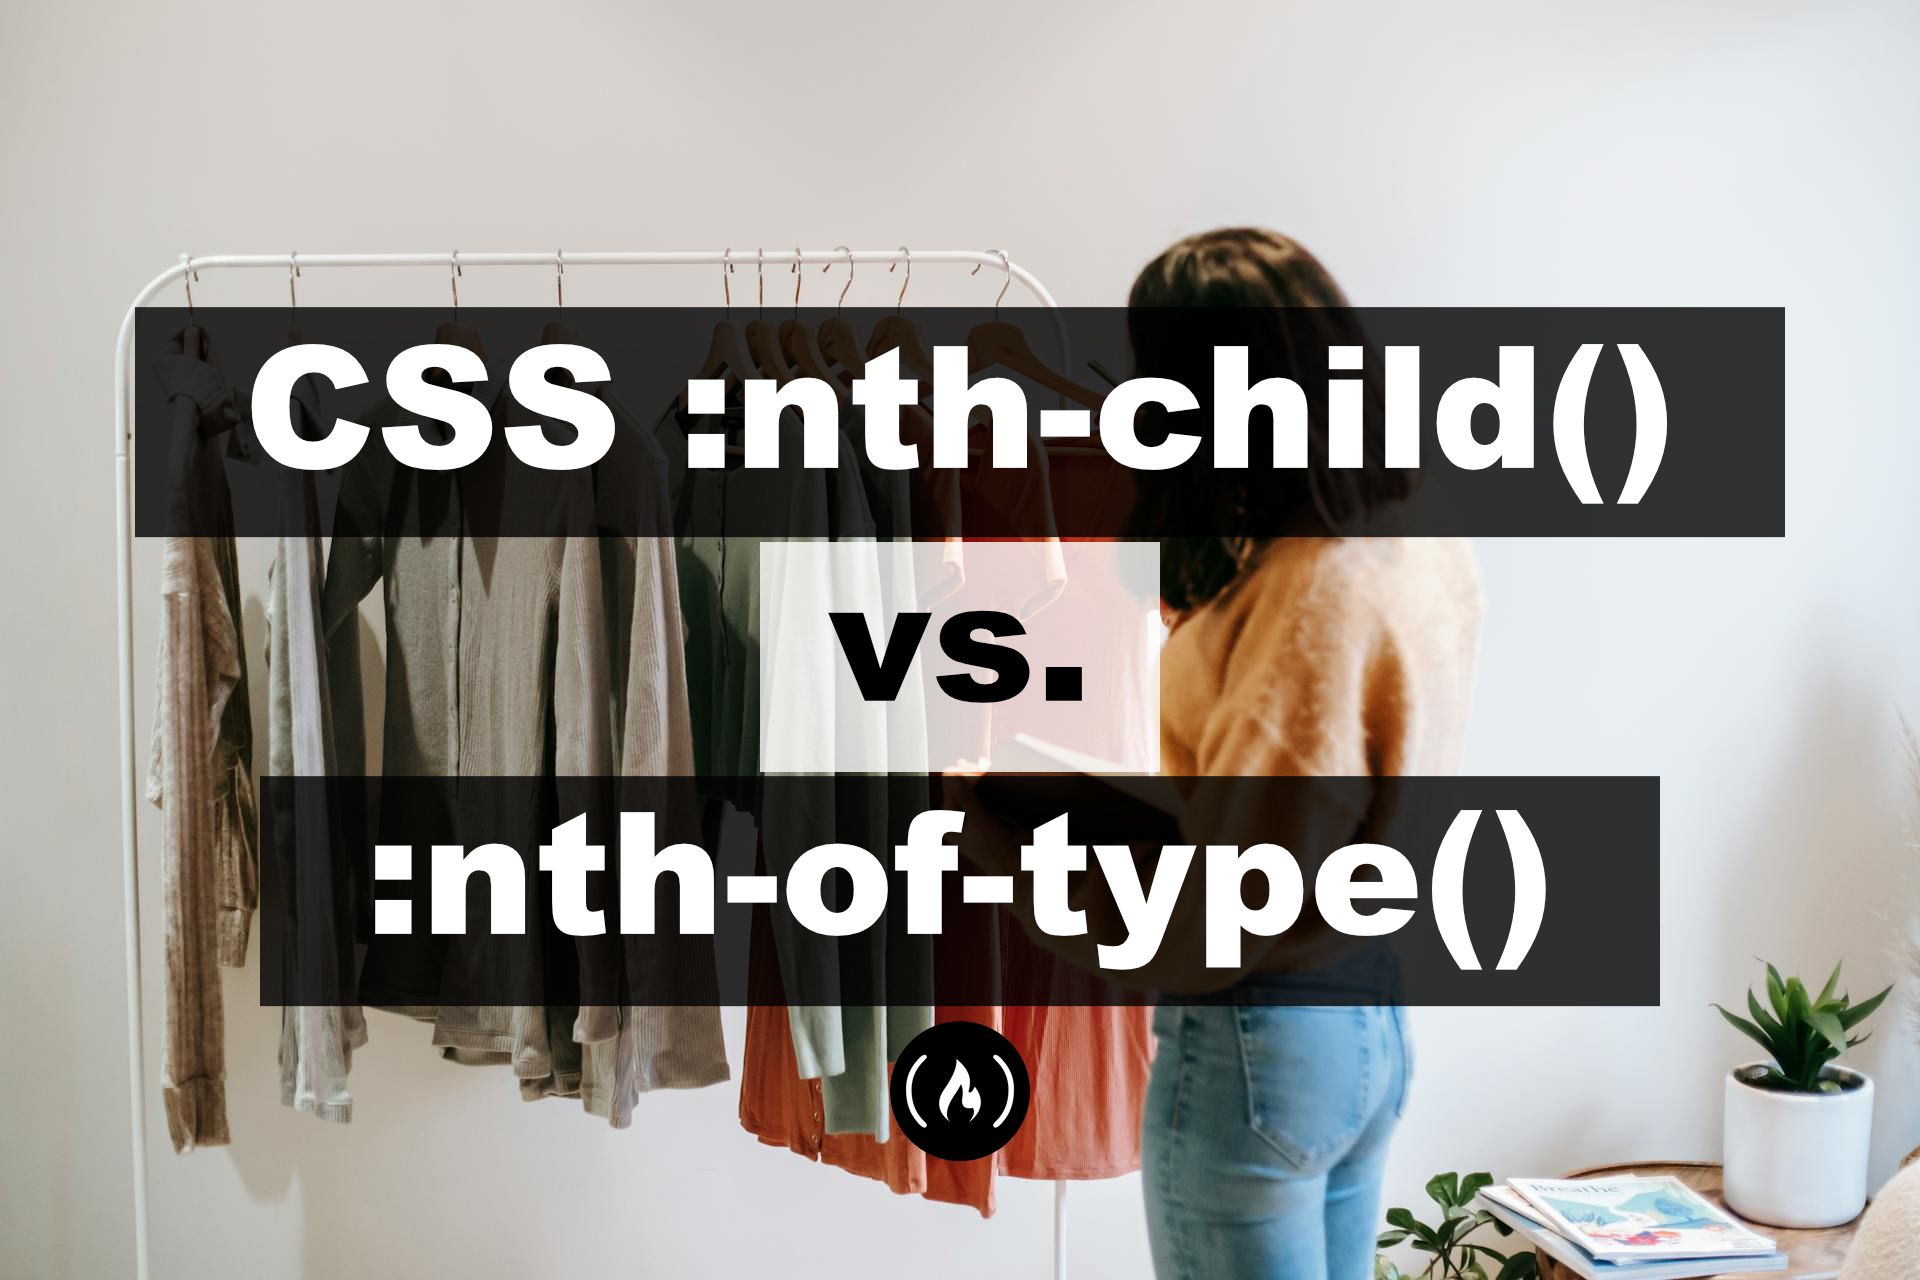 nth-child() vs nth-of-type() Selectors in CSS – What’s the Difference?